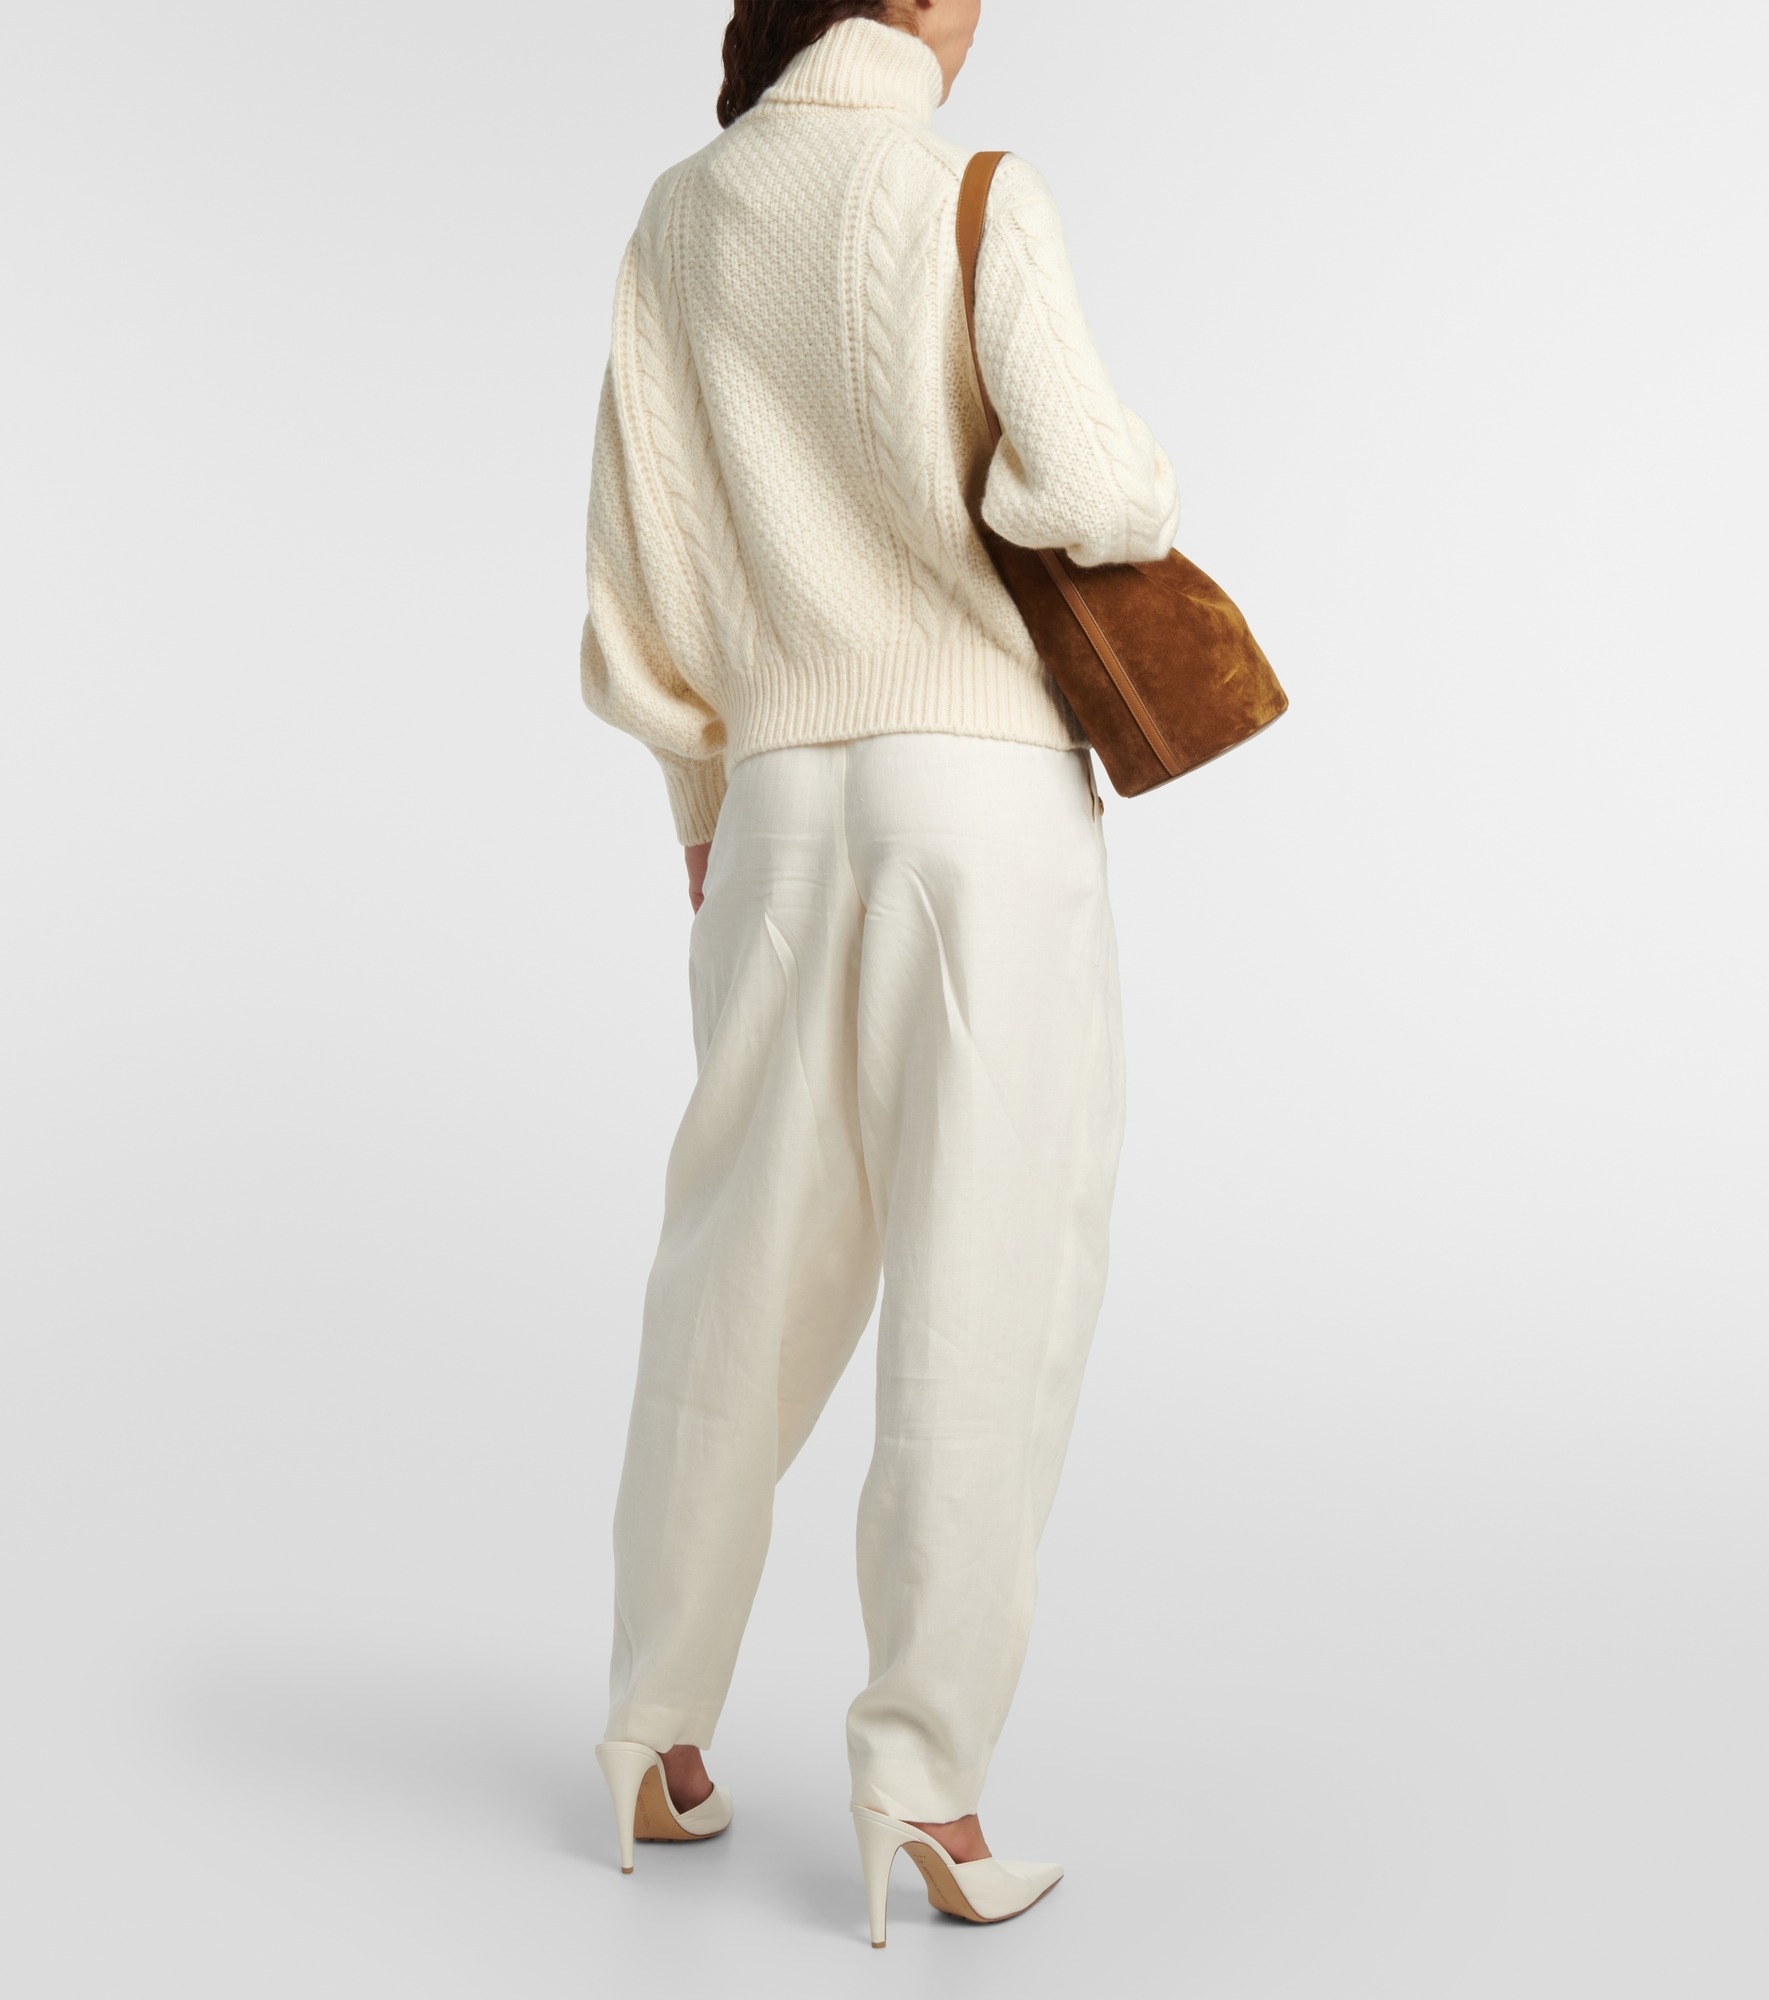 Erdenet cashmere and mohair sweater - 3